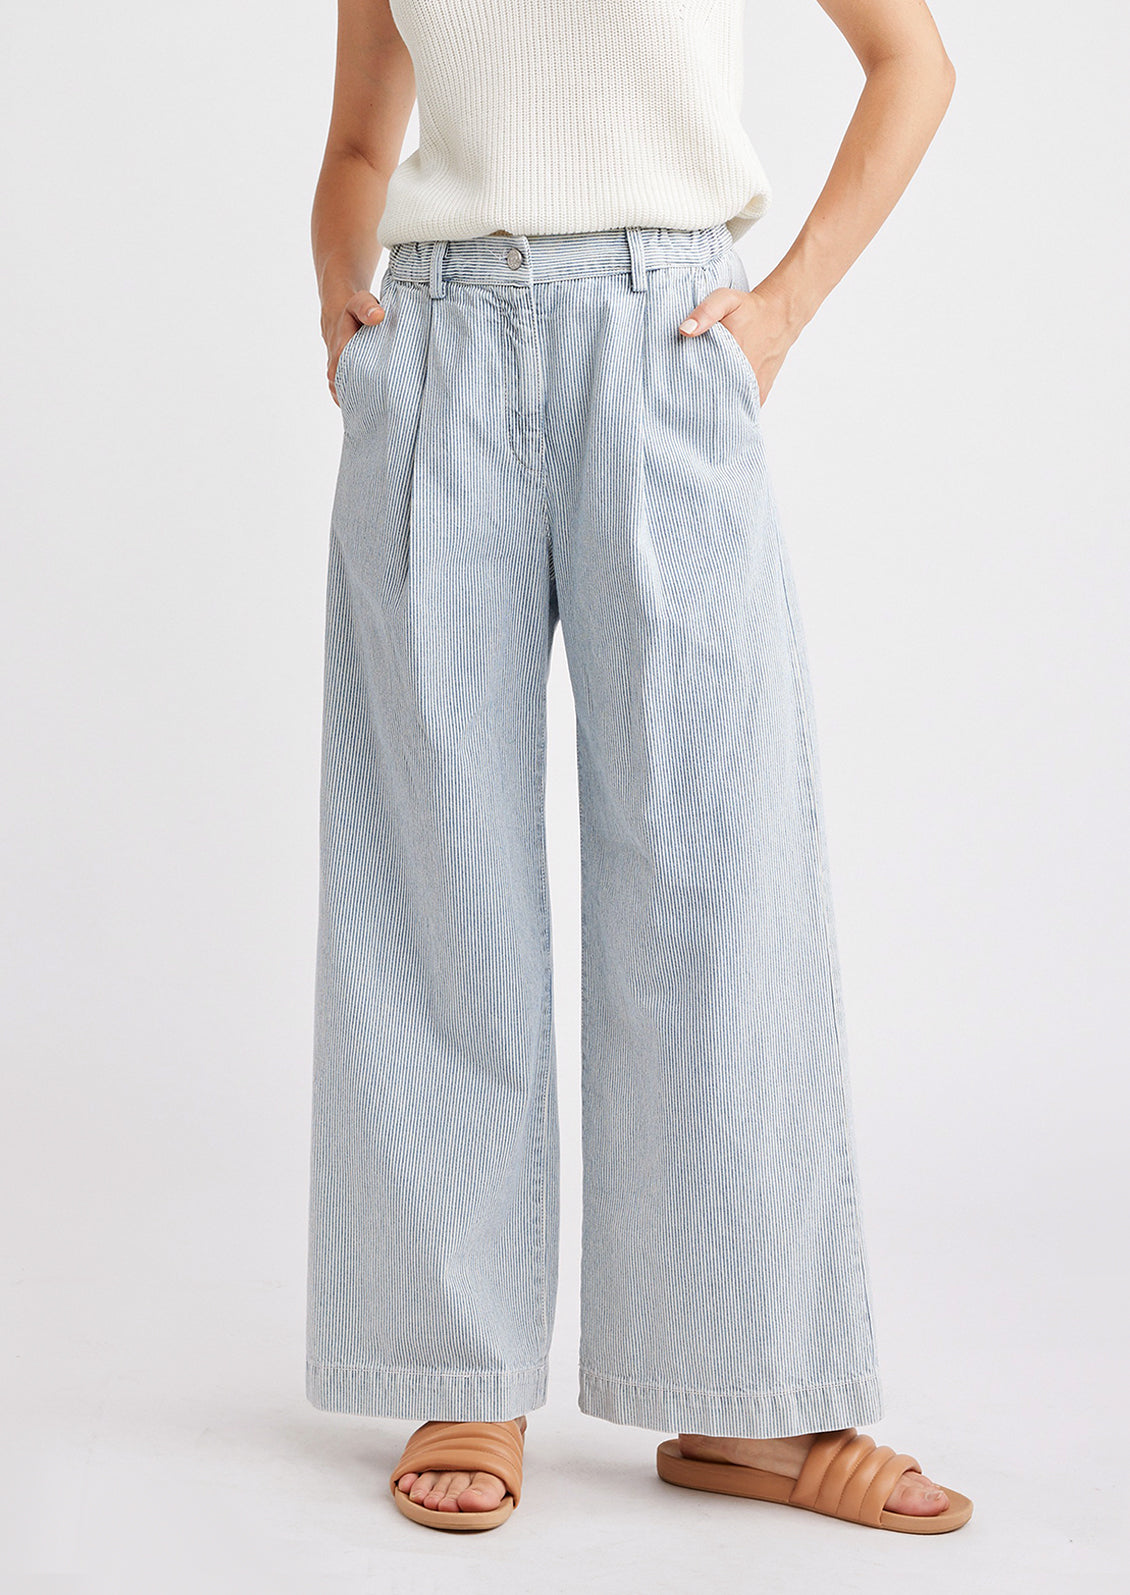 A pair of wide leg, pleat front denim pants in fine blue and white pinstripe.